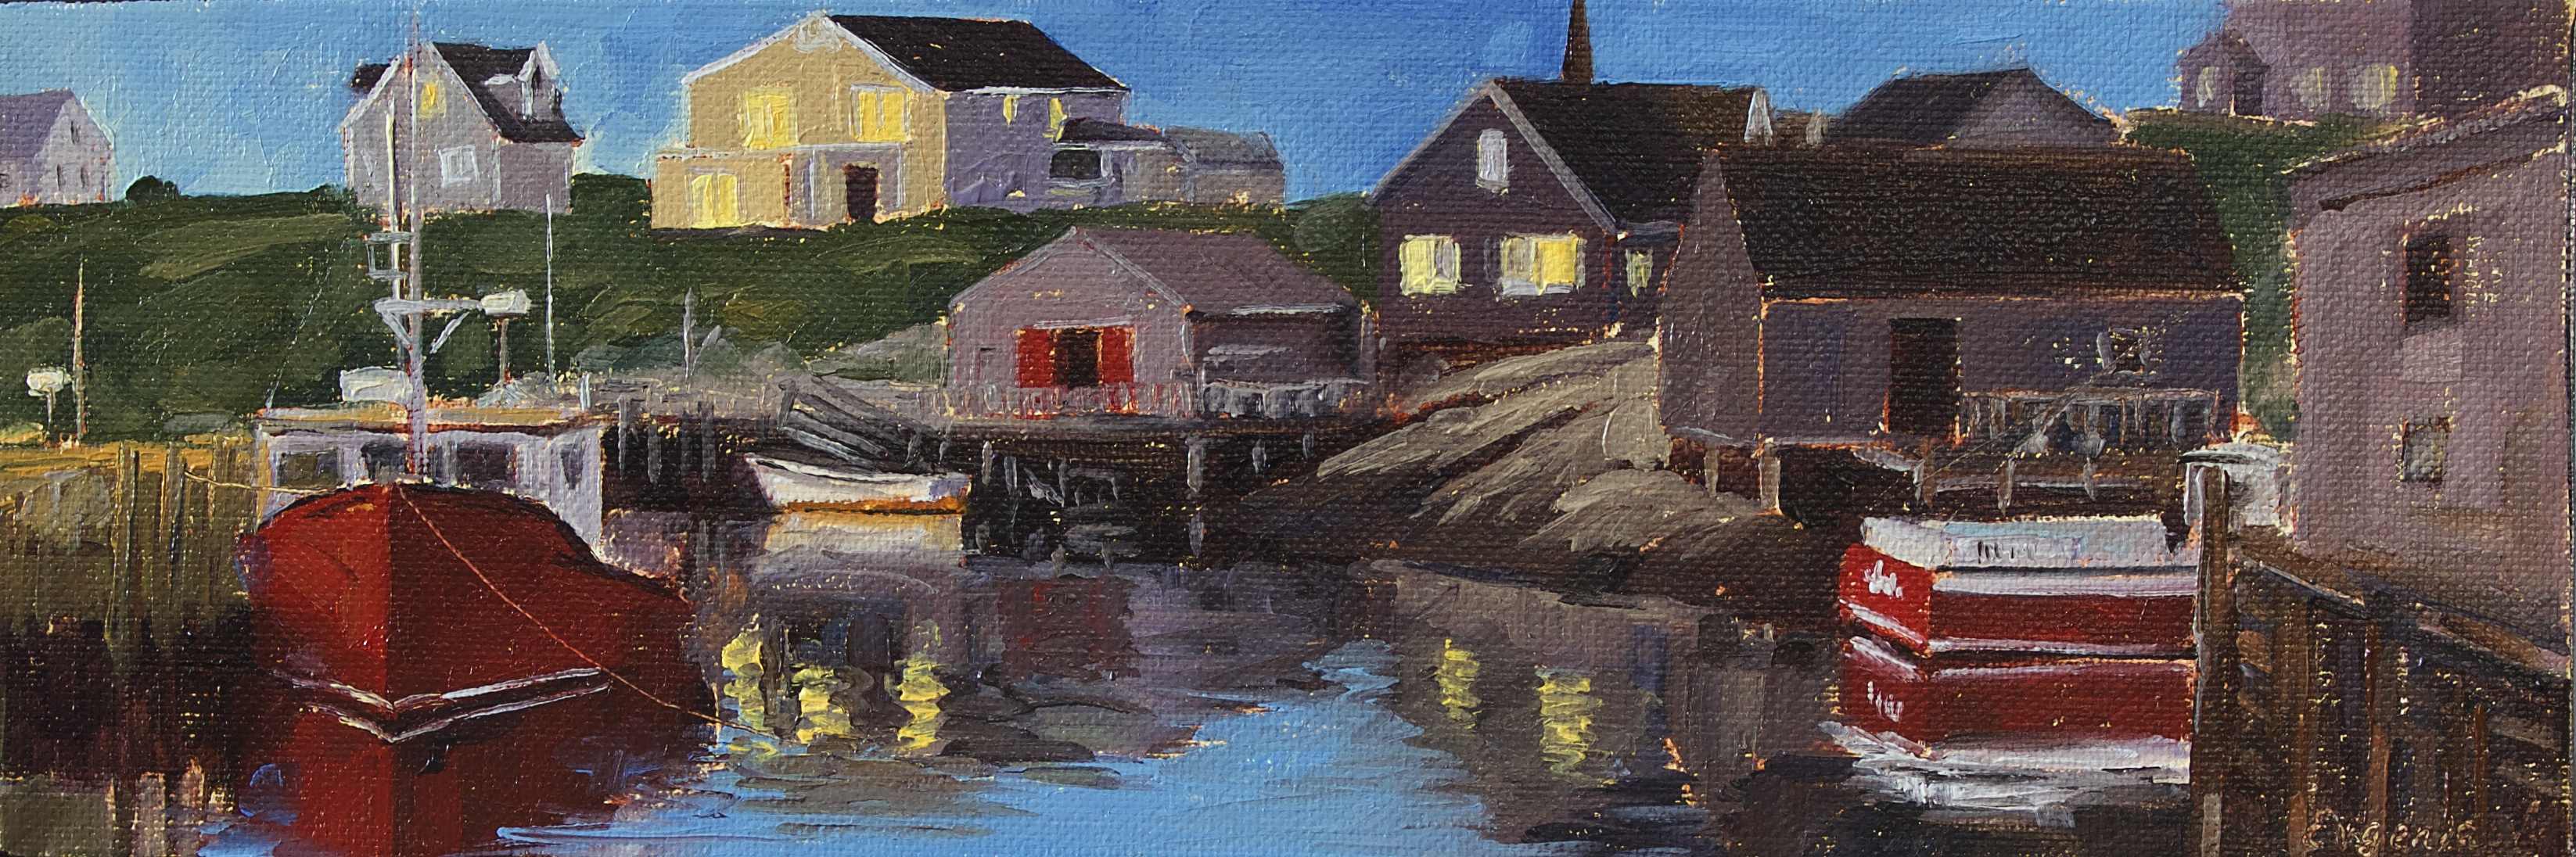 oil painting of Peggy's Cove village at night